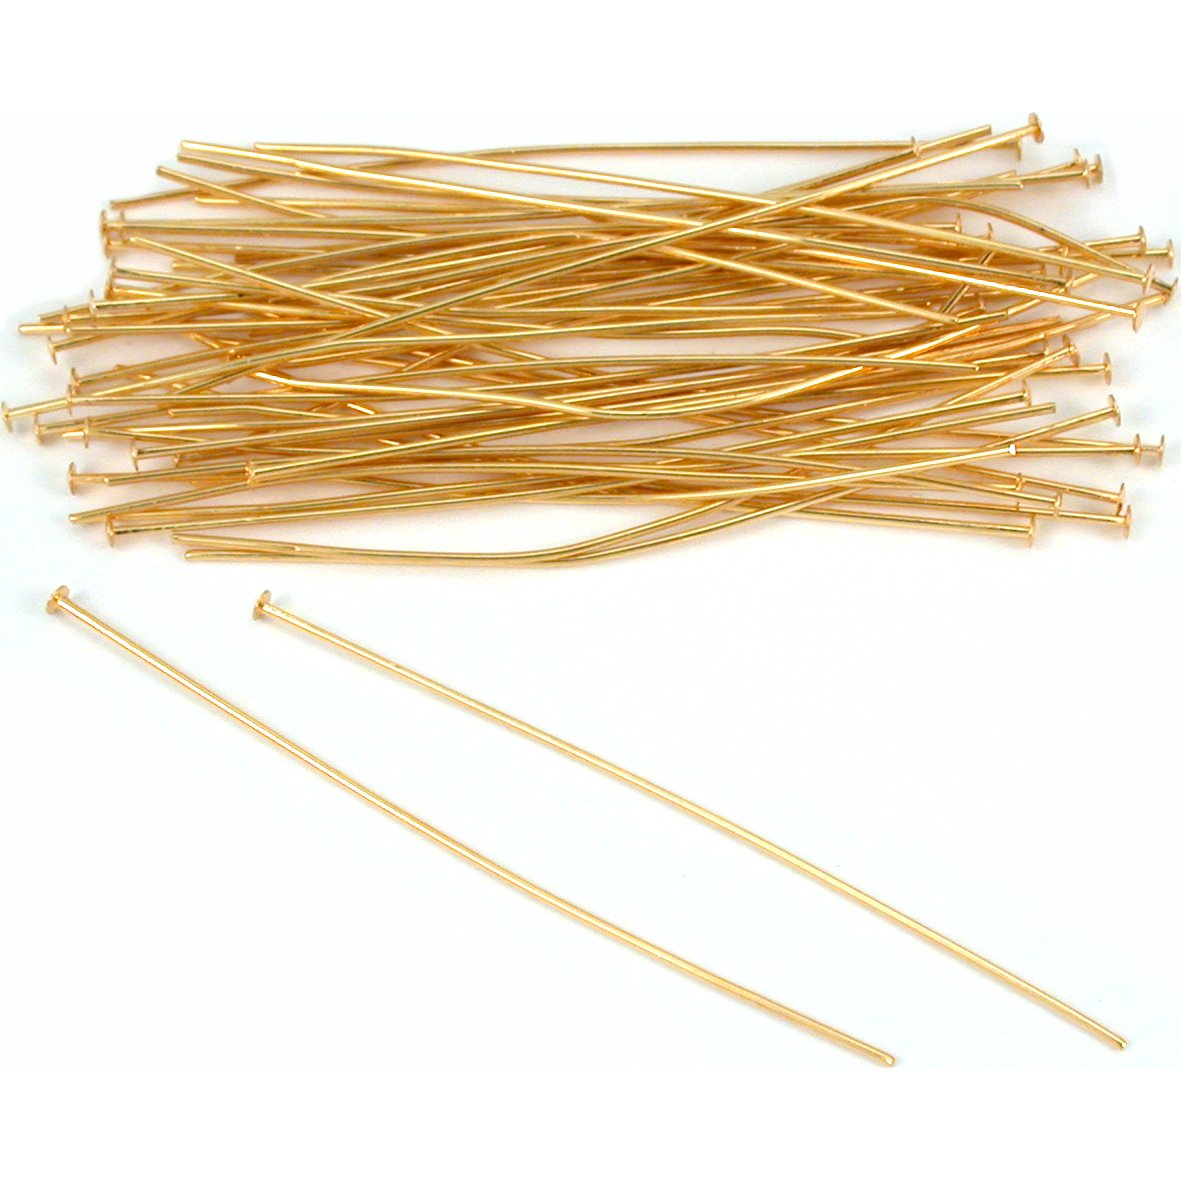 50 Gold Plated Head Pins Jewelry 21 Gauge 2 Inches New